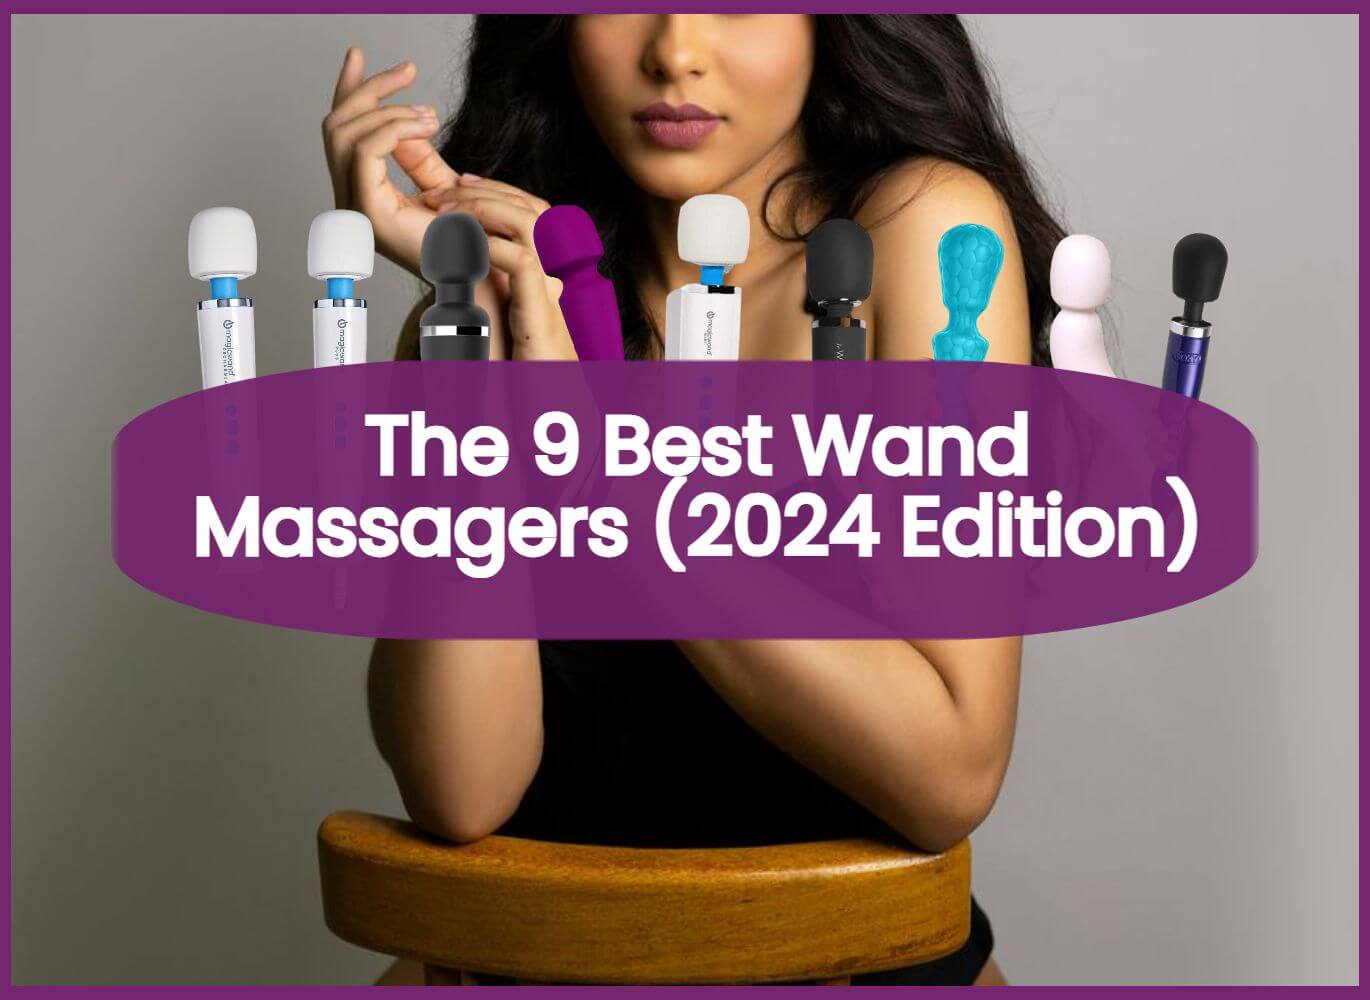 The 9 Best Wand Massagers (2024 Edition)